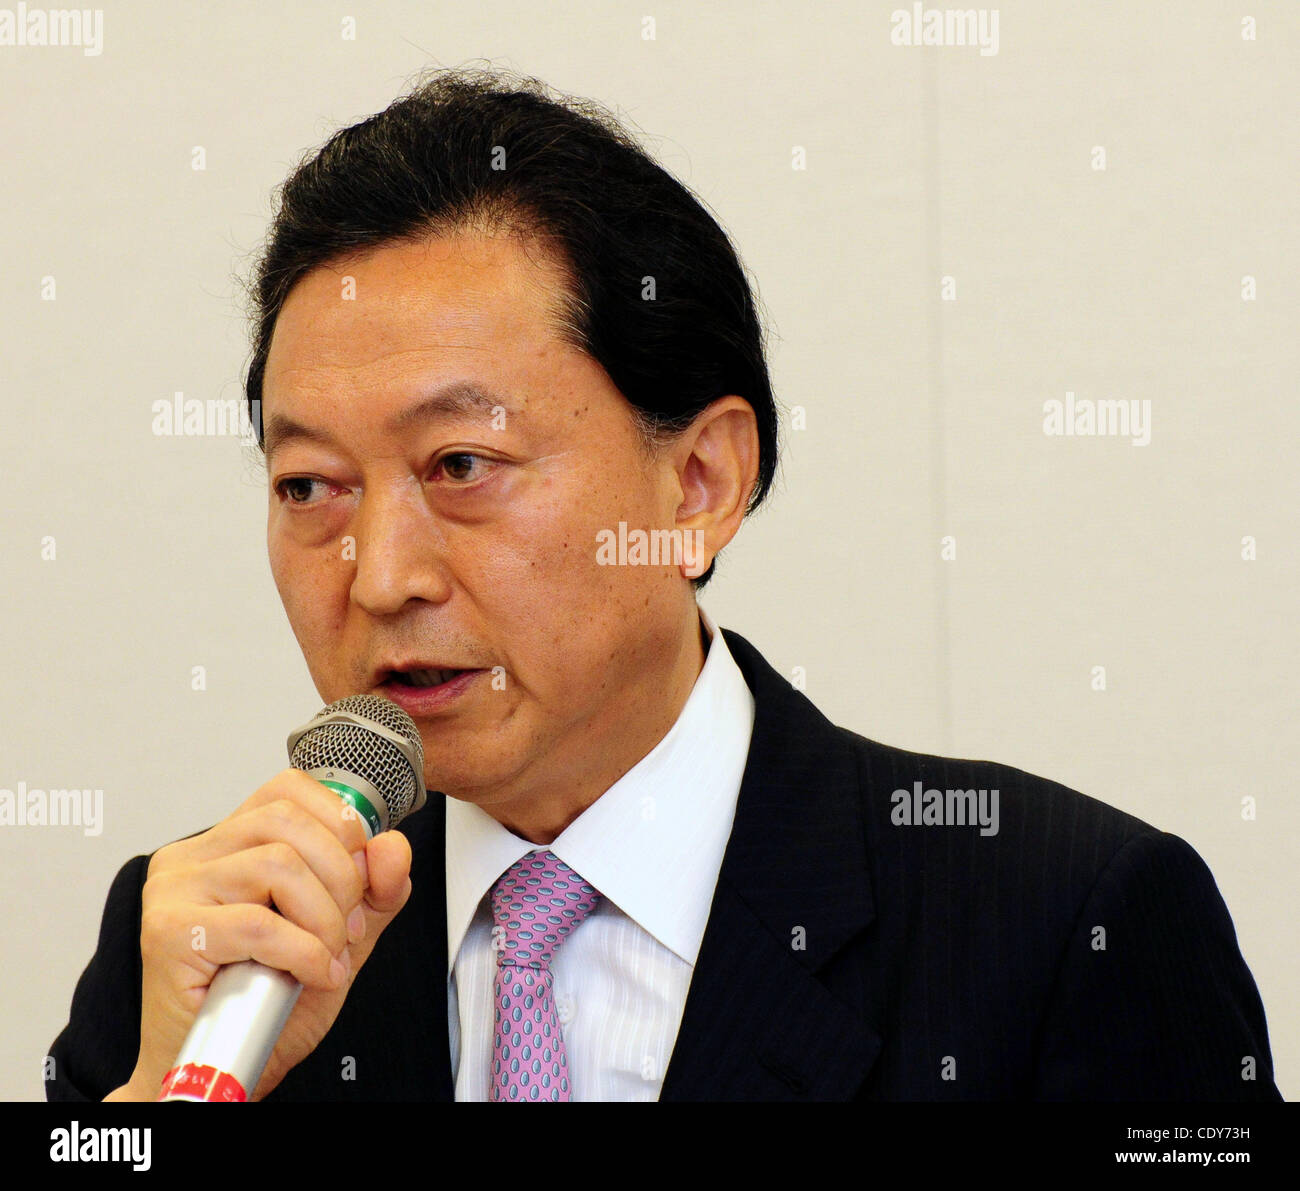 July 26, 2011 - Tokyo, Japan - Former Japanese prime minister YUKIO HATOYAMA speaks at a press conference at the Diet Building in July 25, 2011. He urged the early stepping down of the current Prime Minister Naoto Kan. (Credit Image: © Hajime Takashi/Jana Press/ZUMAPRESS.com) Stock Photo